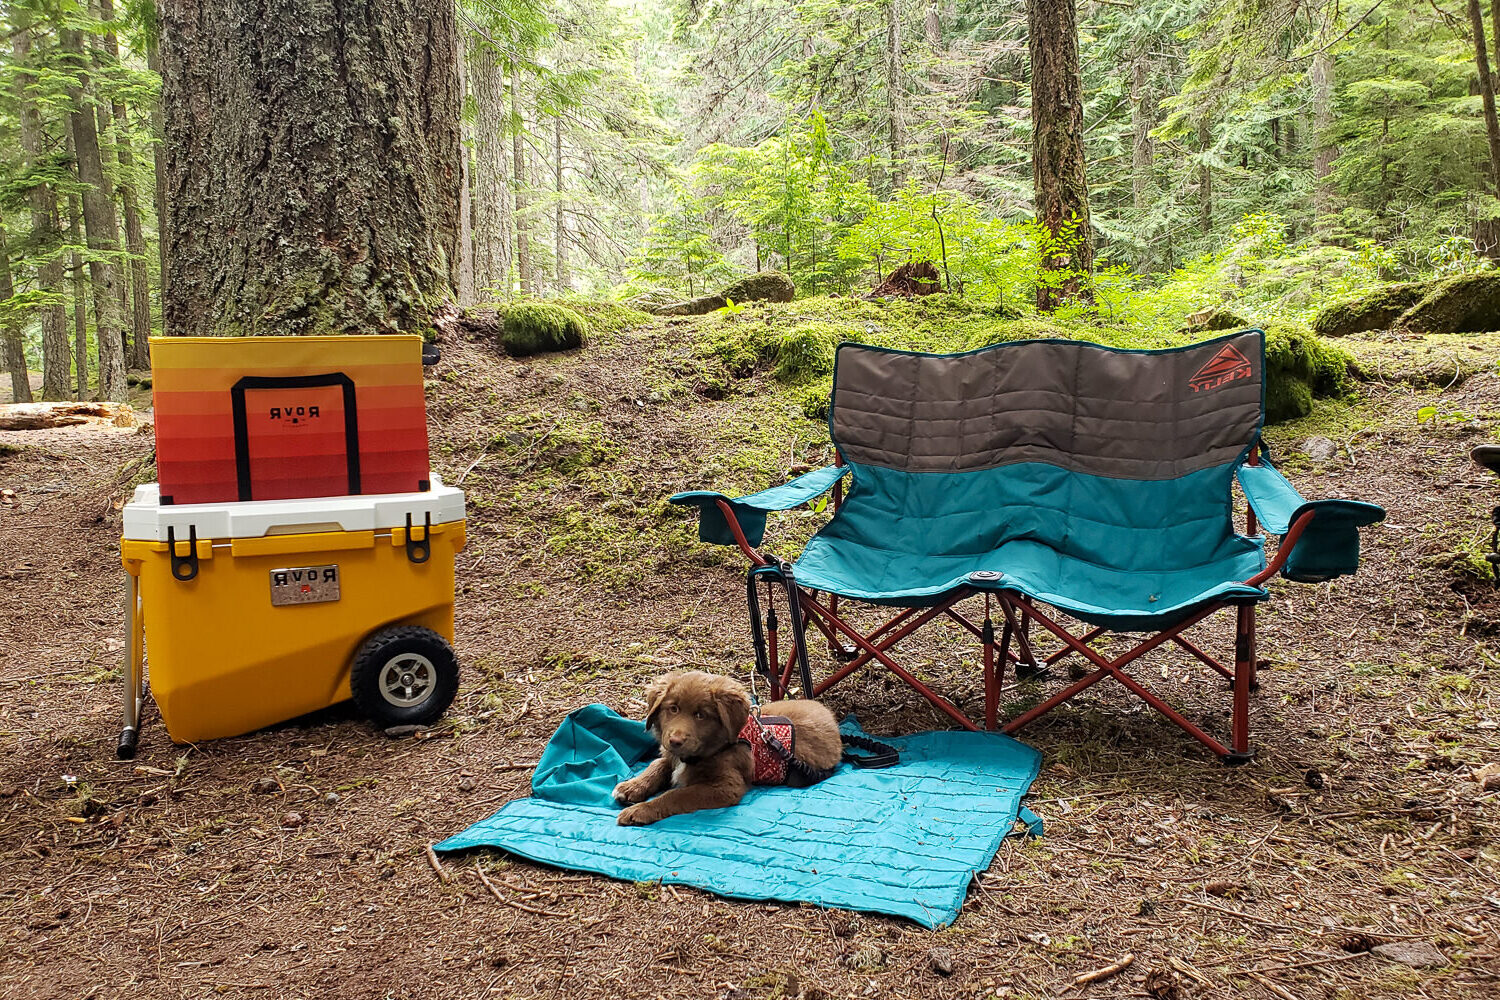 A puppy sitting next to the Kelty Low Loveseat and the Rovr Rollr 60 Cooler in a forested setting